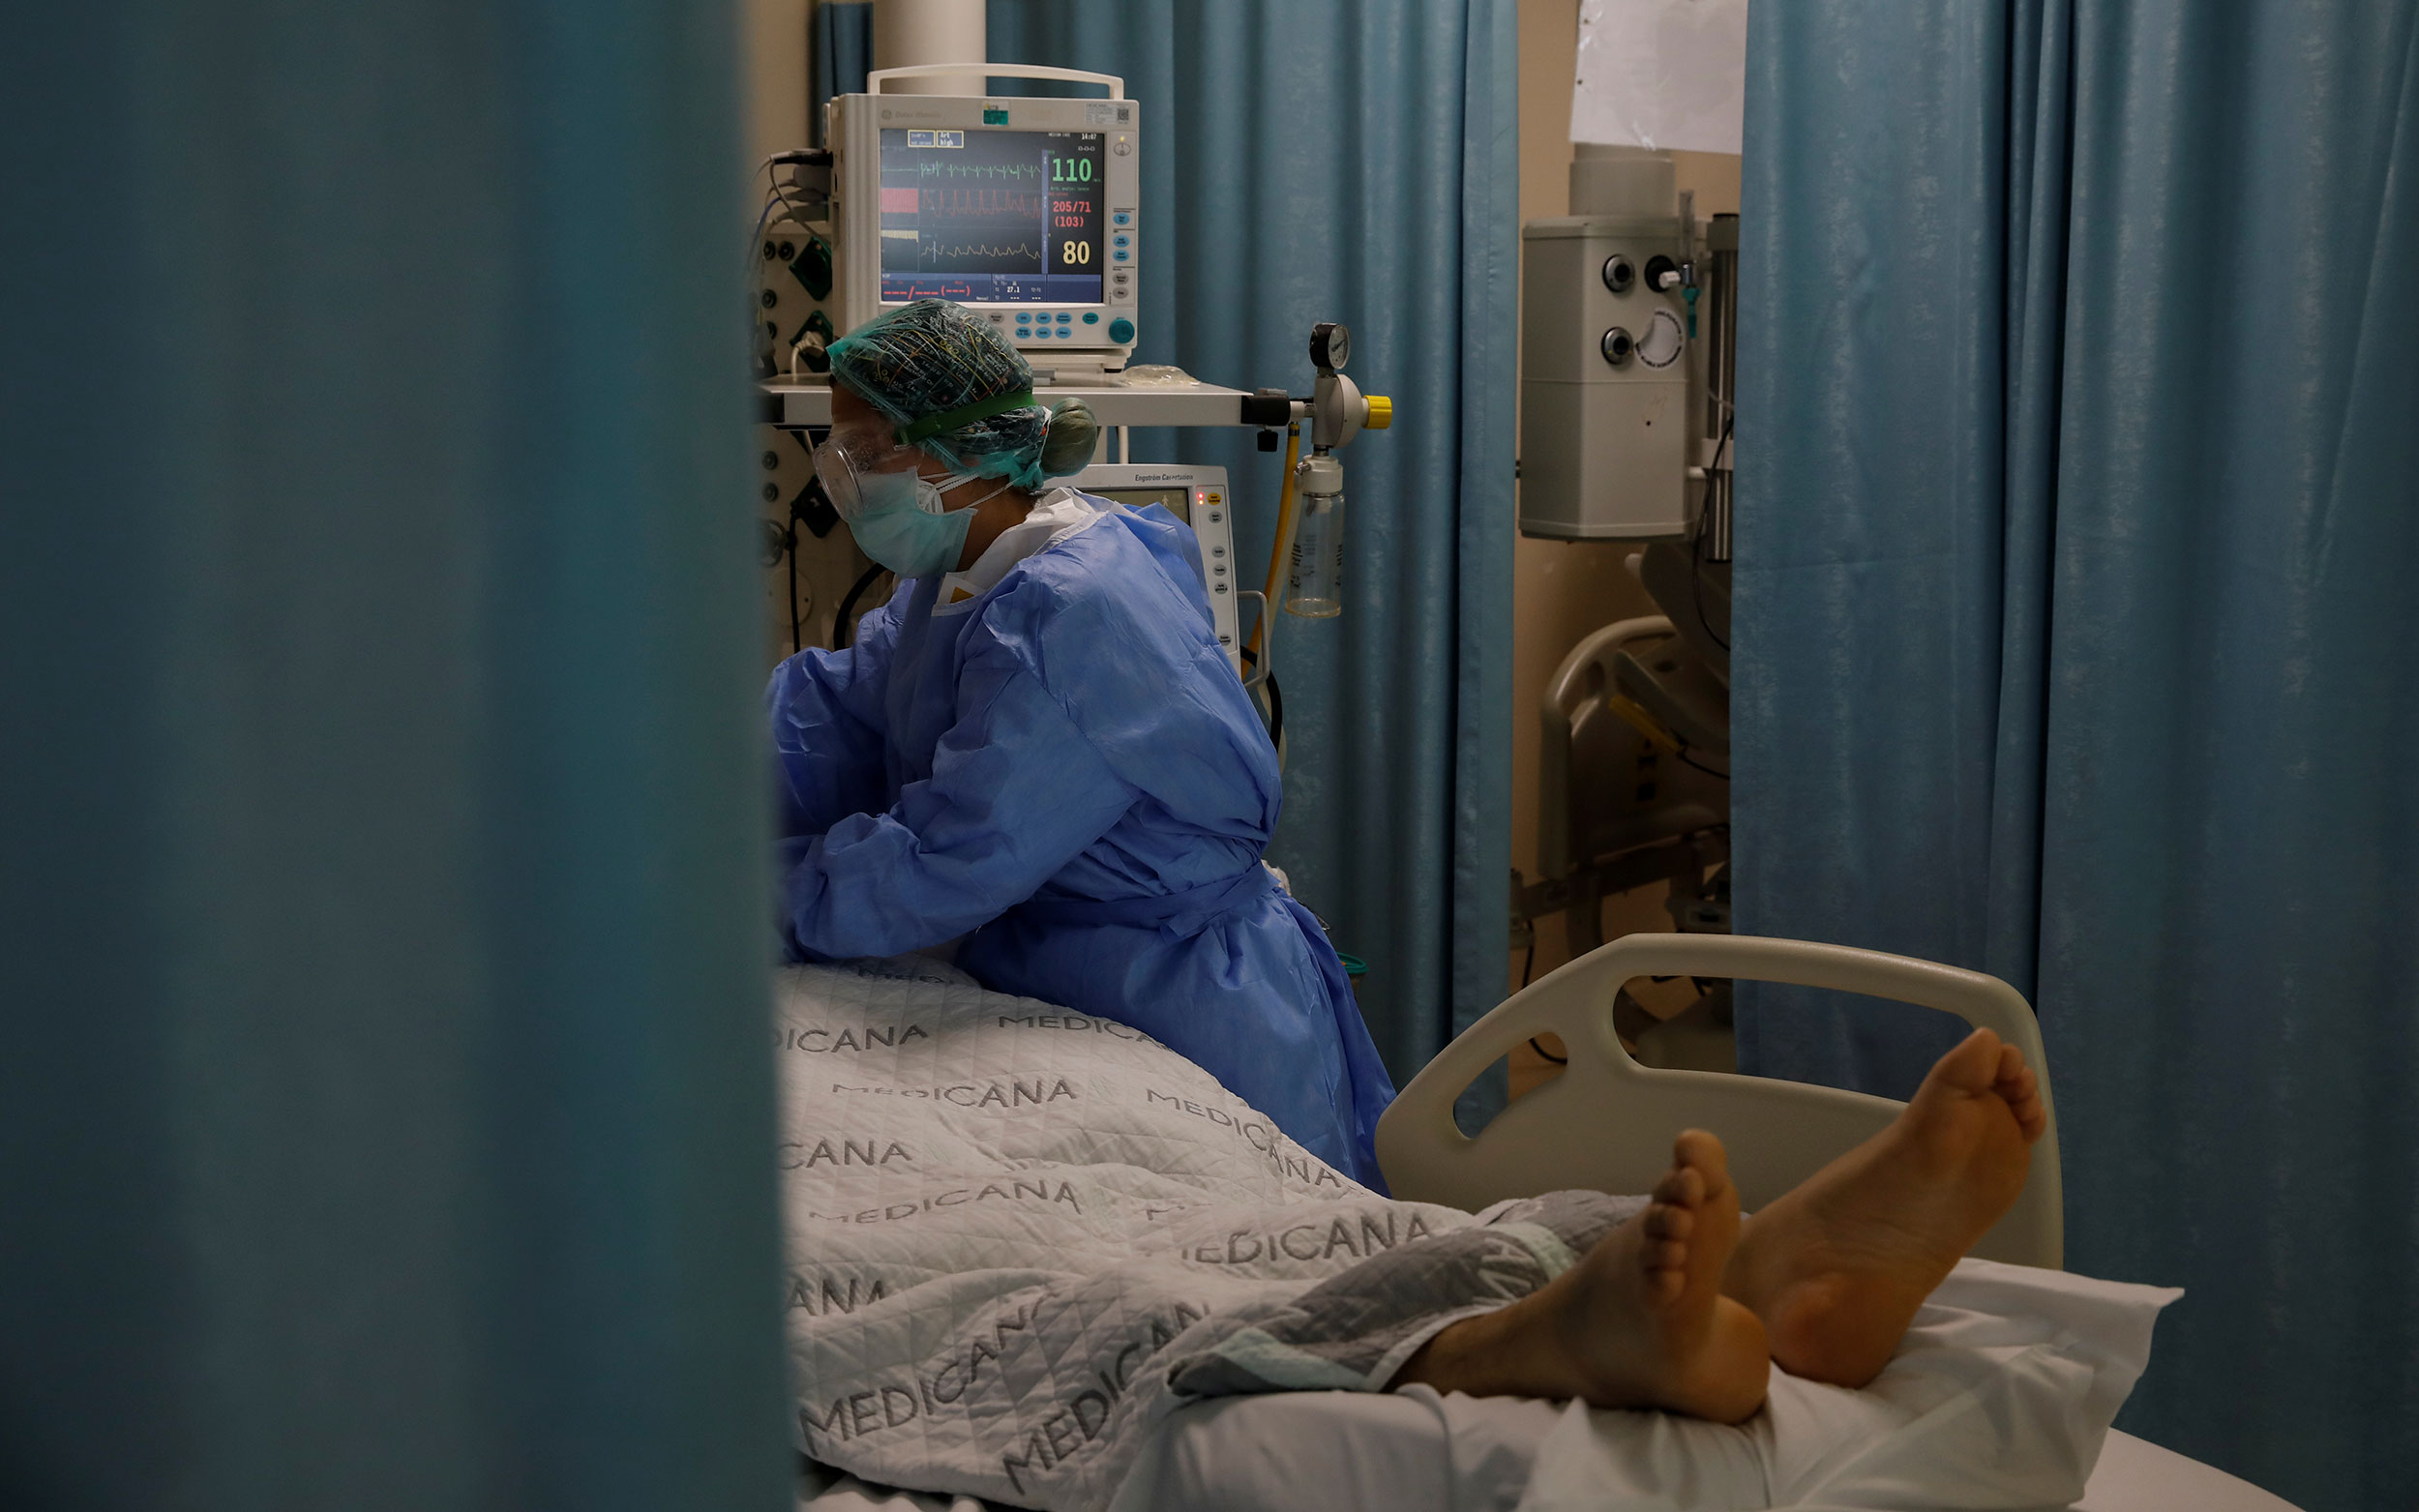 A nurse cares for a coronavirus patient at the Medicana International Hospital in Istanbul, Turkey, on April 14.